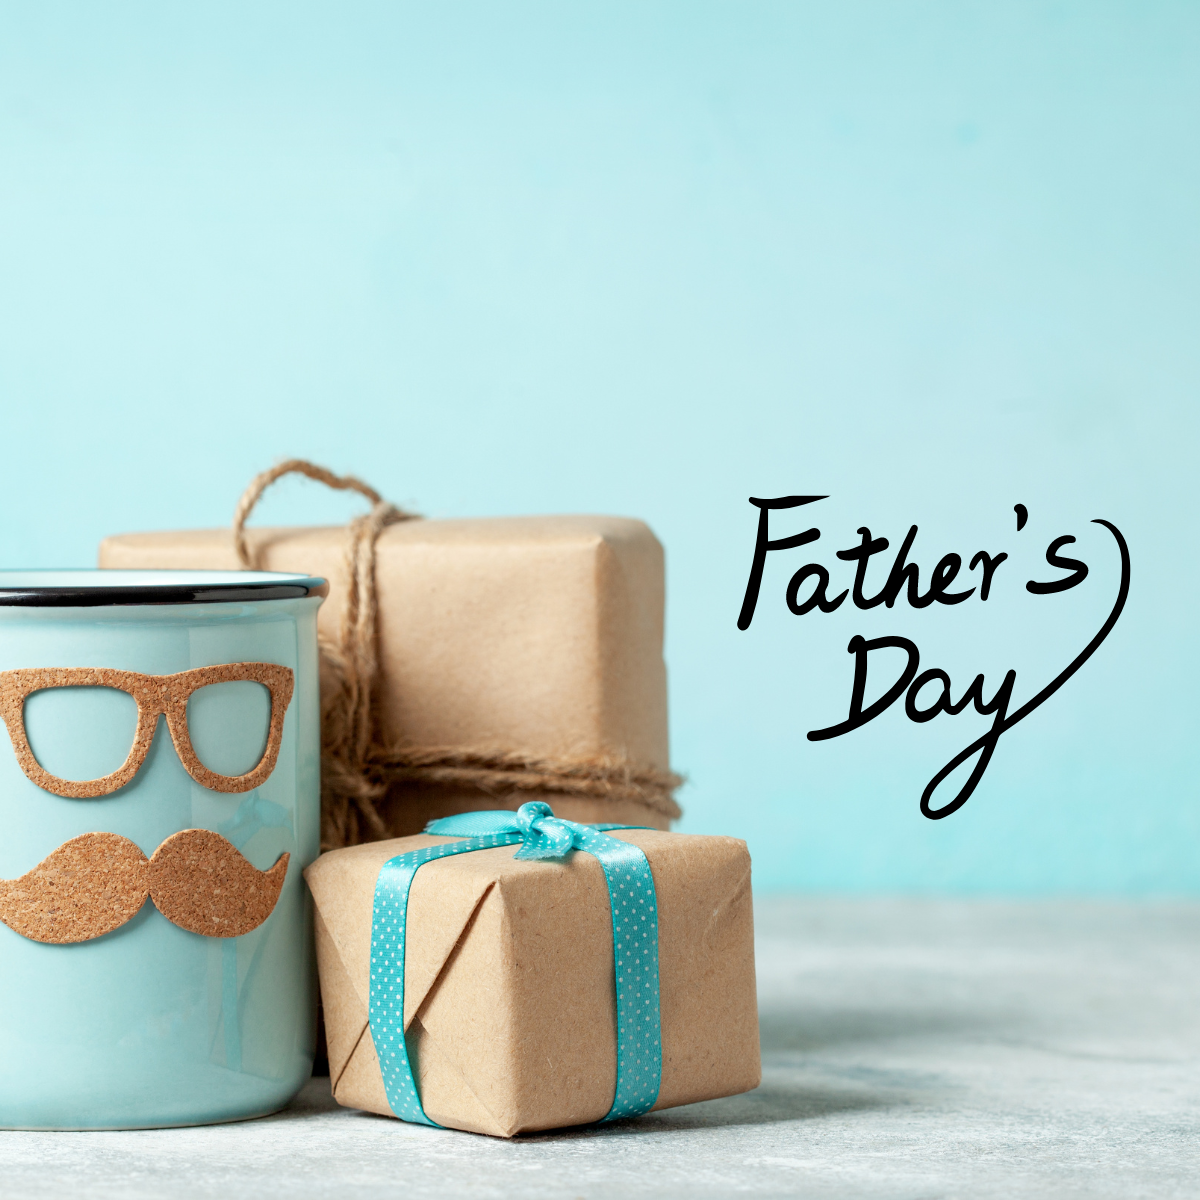 Top Picks for Fathers Day